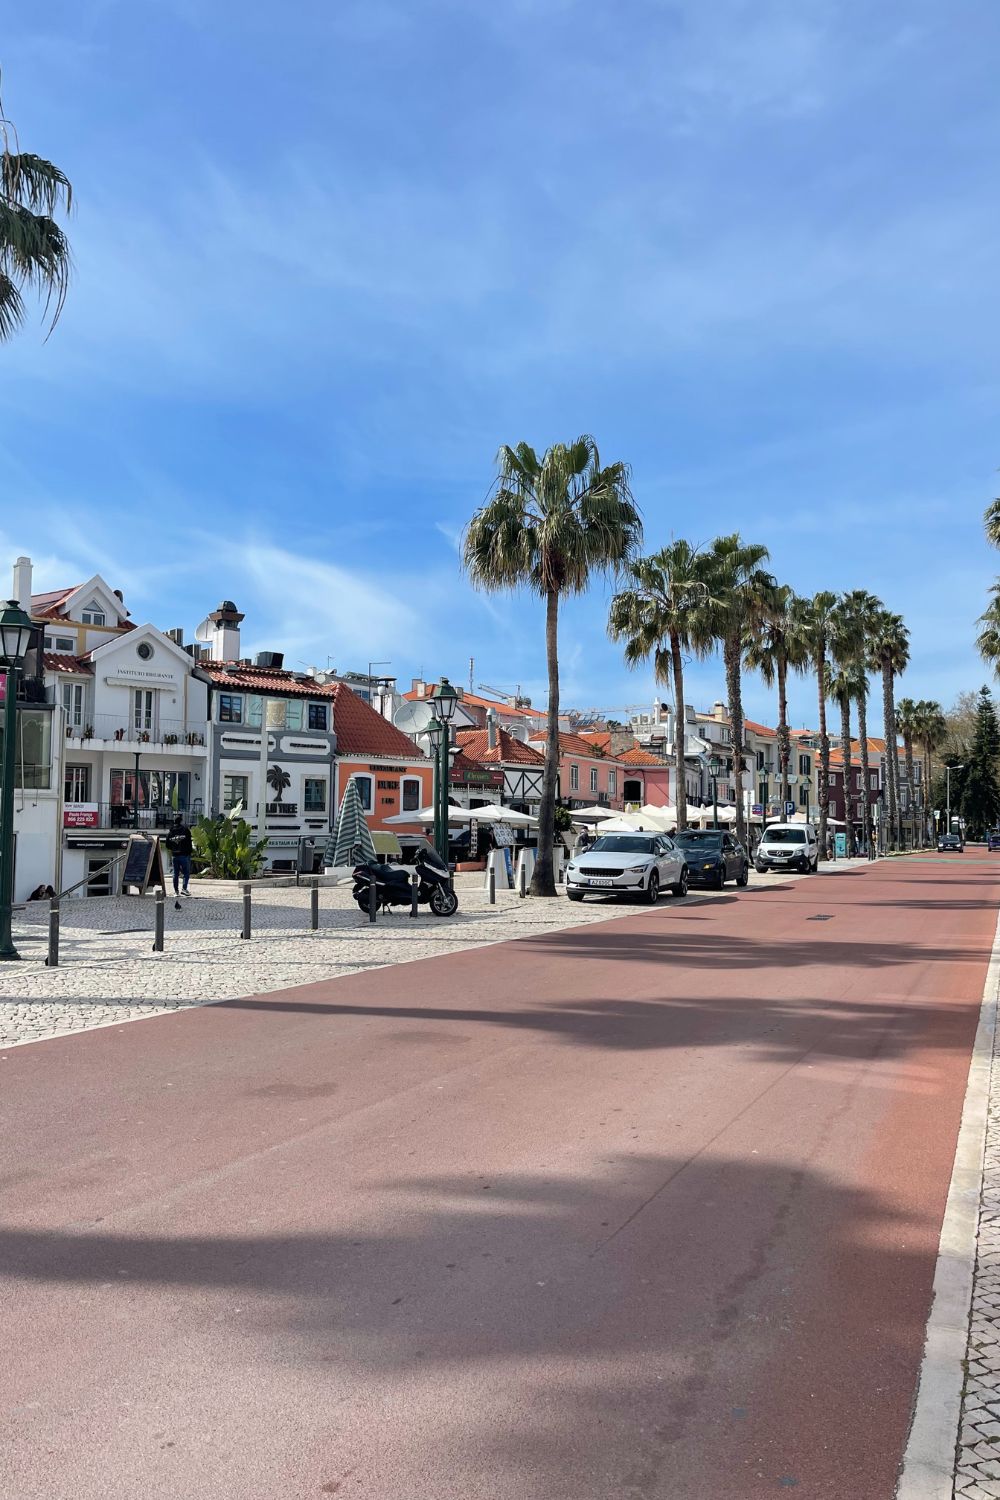 A charming street in Cascais lined with palm trees and traditional Portuguese architecture. The clear sky and leisurely parked cars complement the relaxed atmosphere, capturing the essence of a laid-back, sunny day in this coastal town.